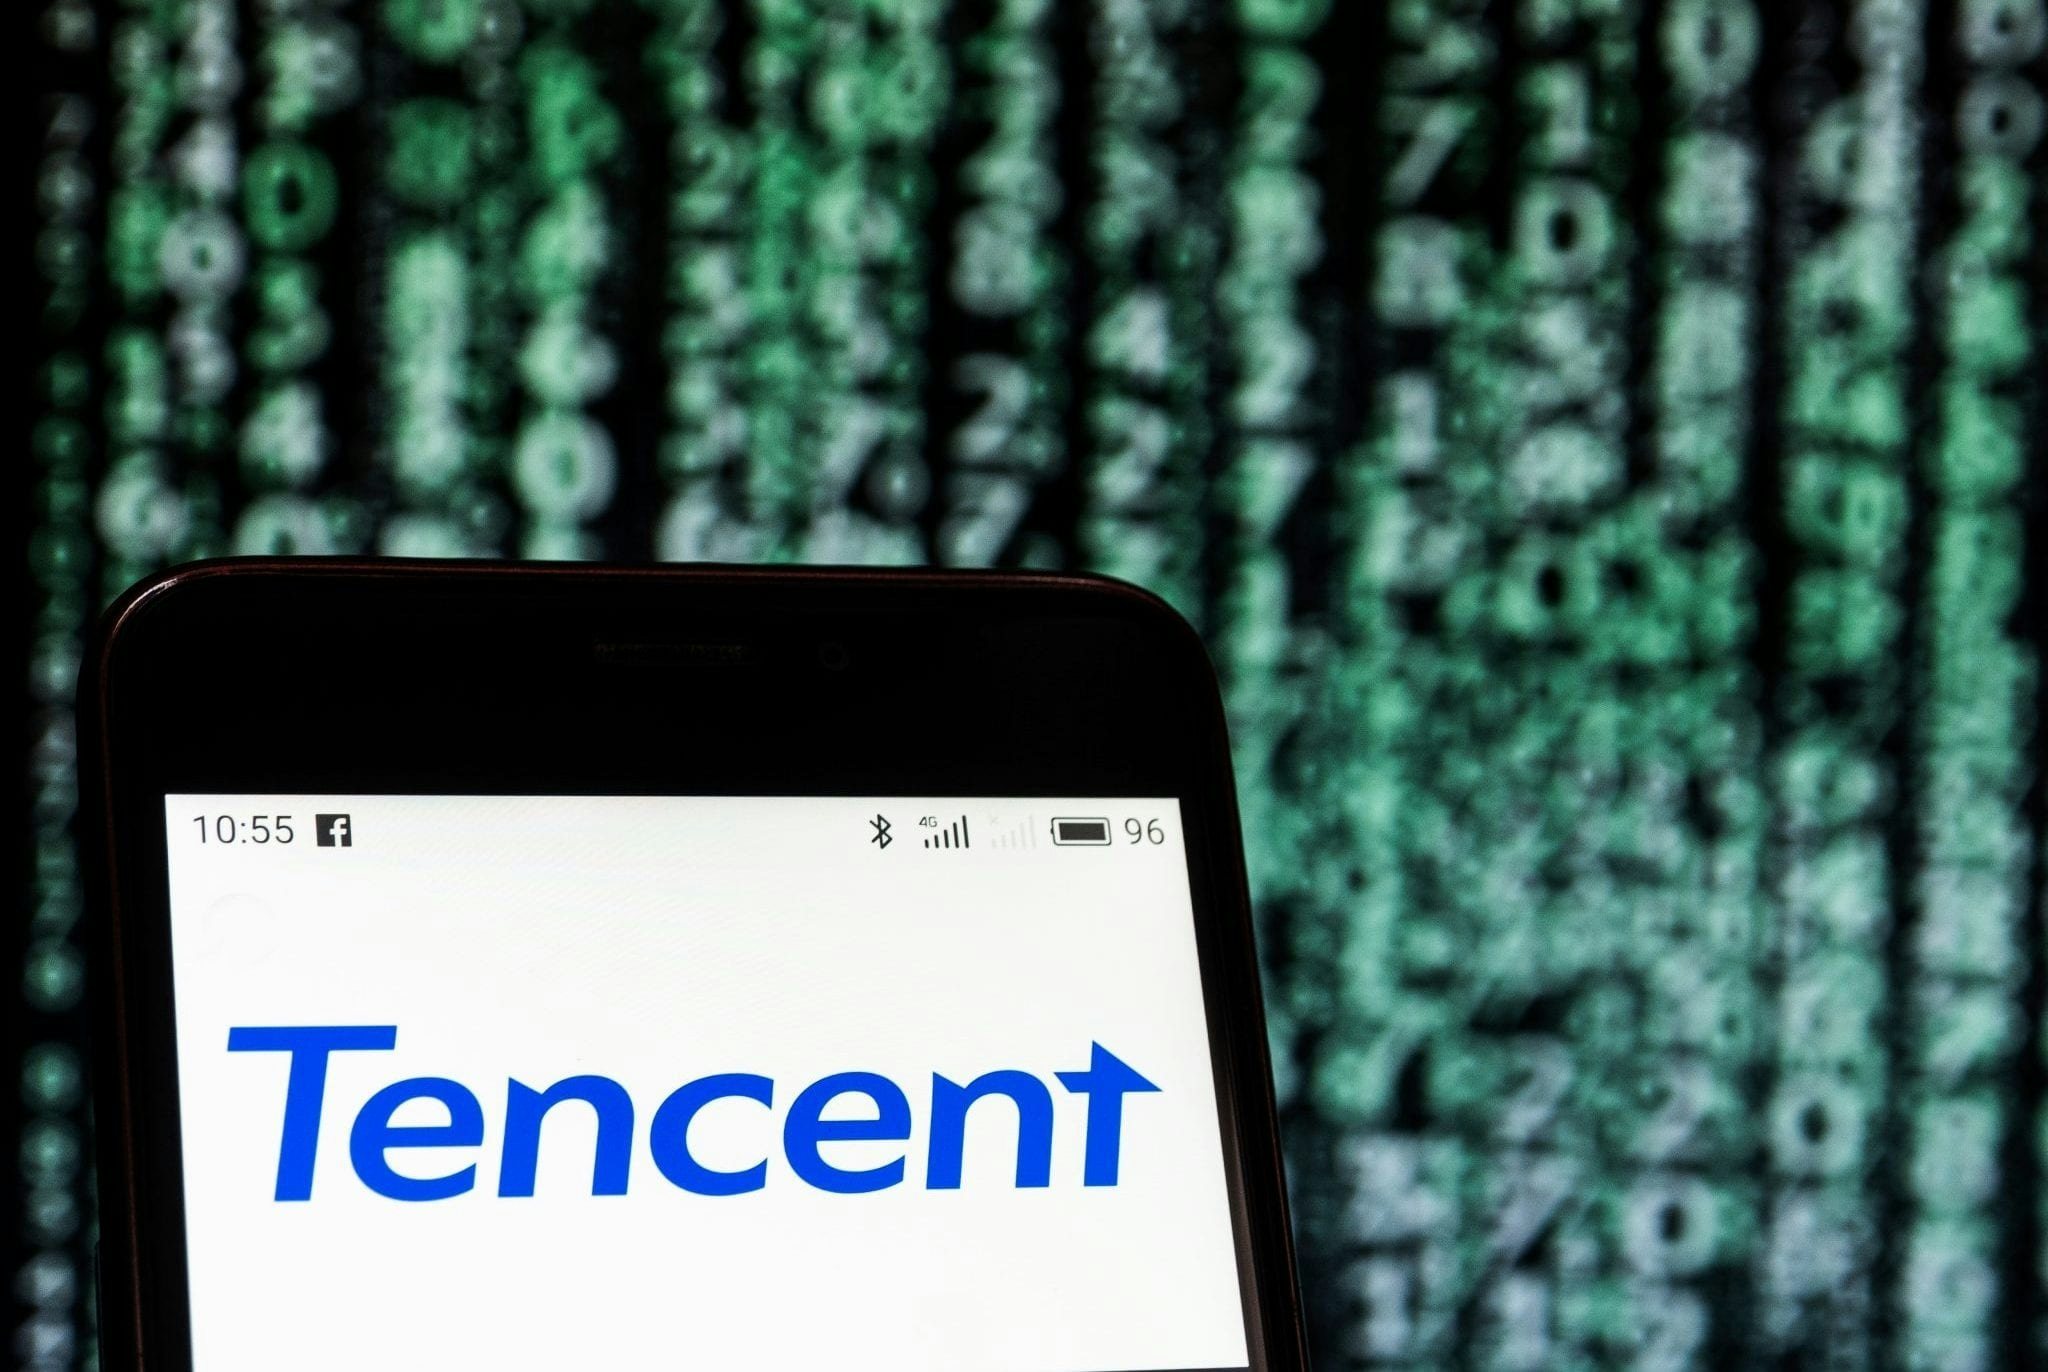 Chinese tech giant Tencent Holdings reported quarterly earnings that beat Wall Street forecasts, largely due to a “social and other” advertising sales jump of 61 percent year-on-year. Photo: Shutterstock